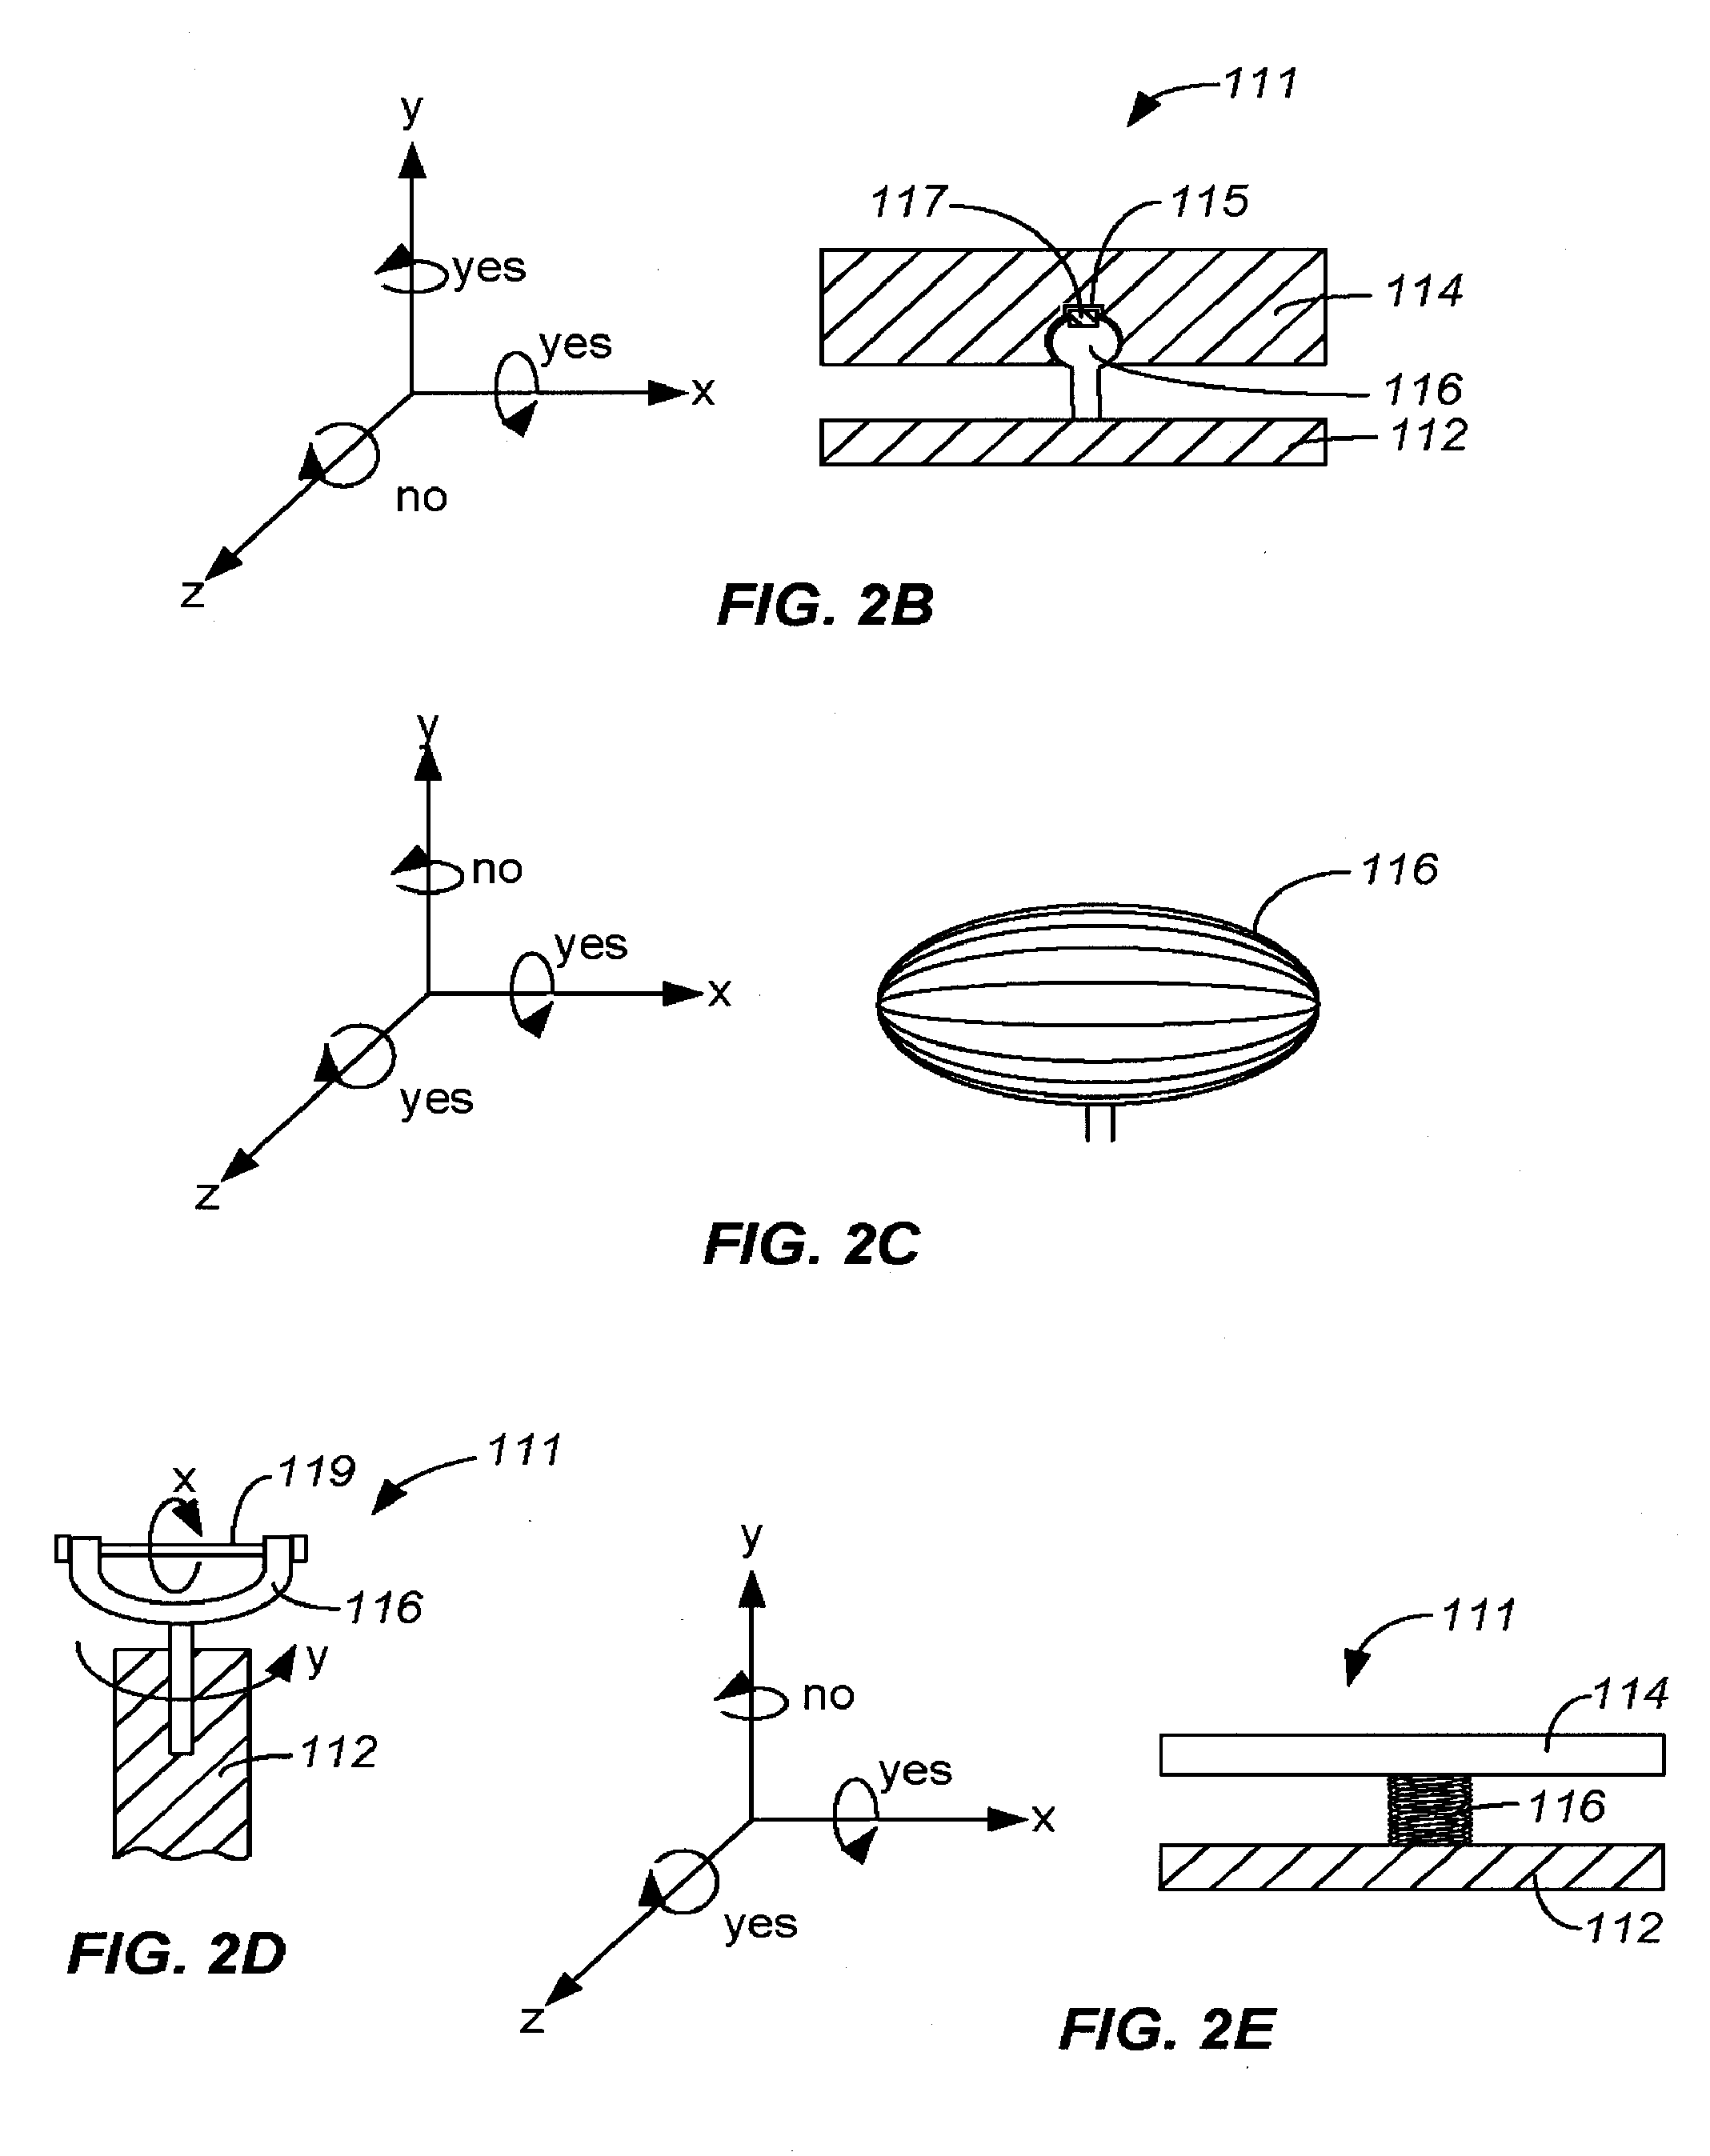 Auto-aligning ablating device and method of use